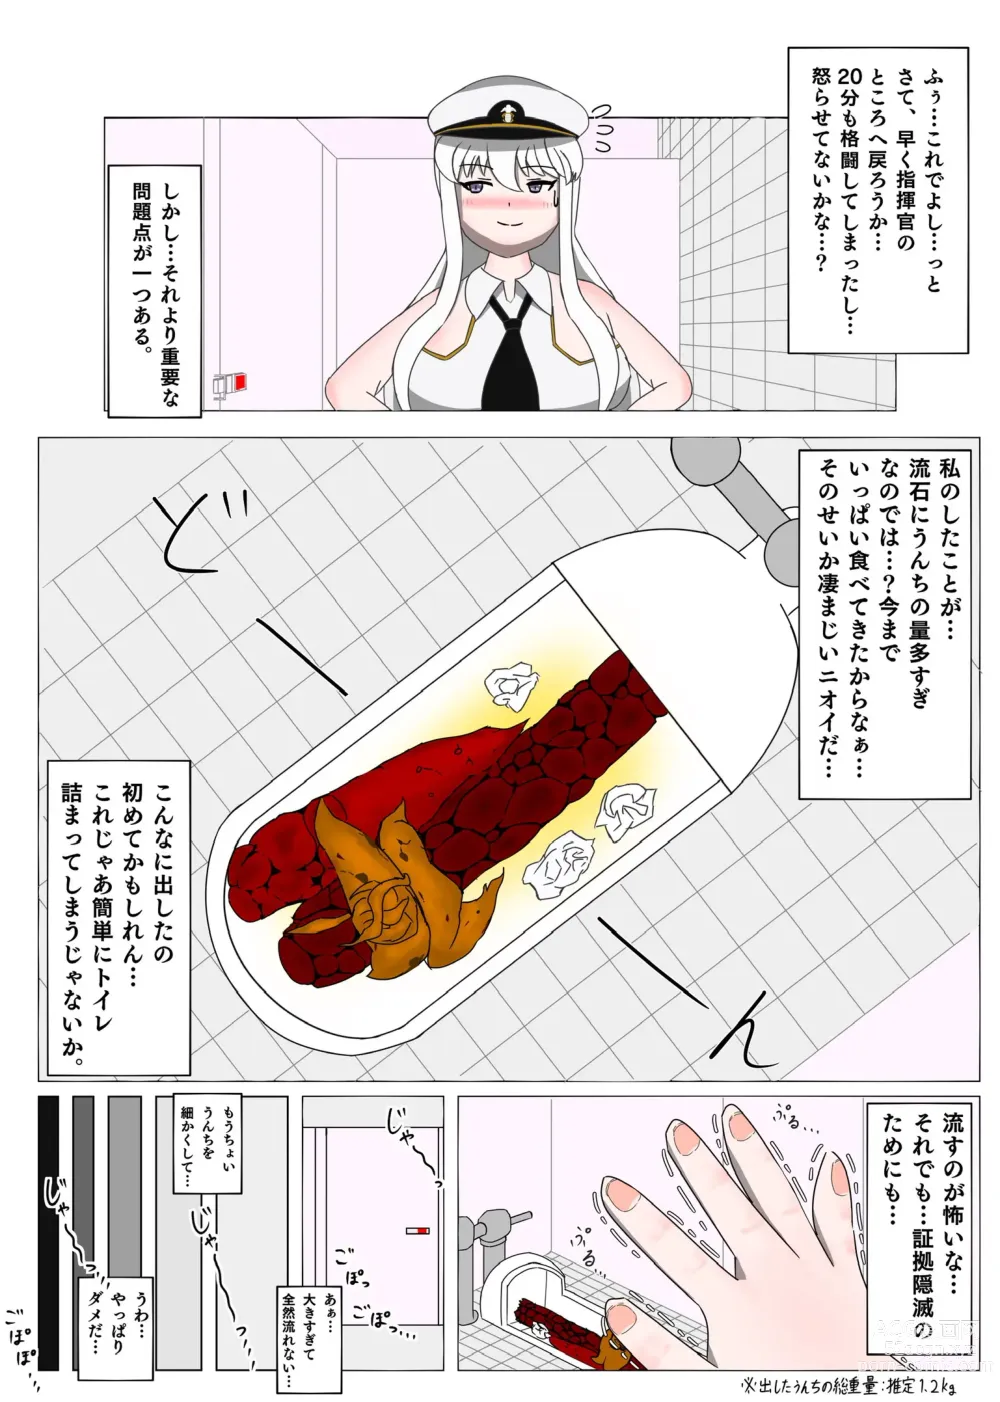 Page 14 of doujinshi A manga in which Enterprise relieves 3 days worth of poop in a Japanese-style toilet